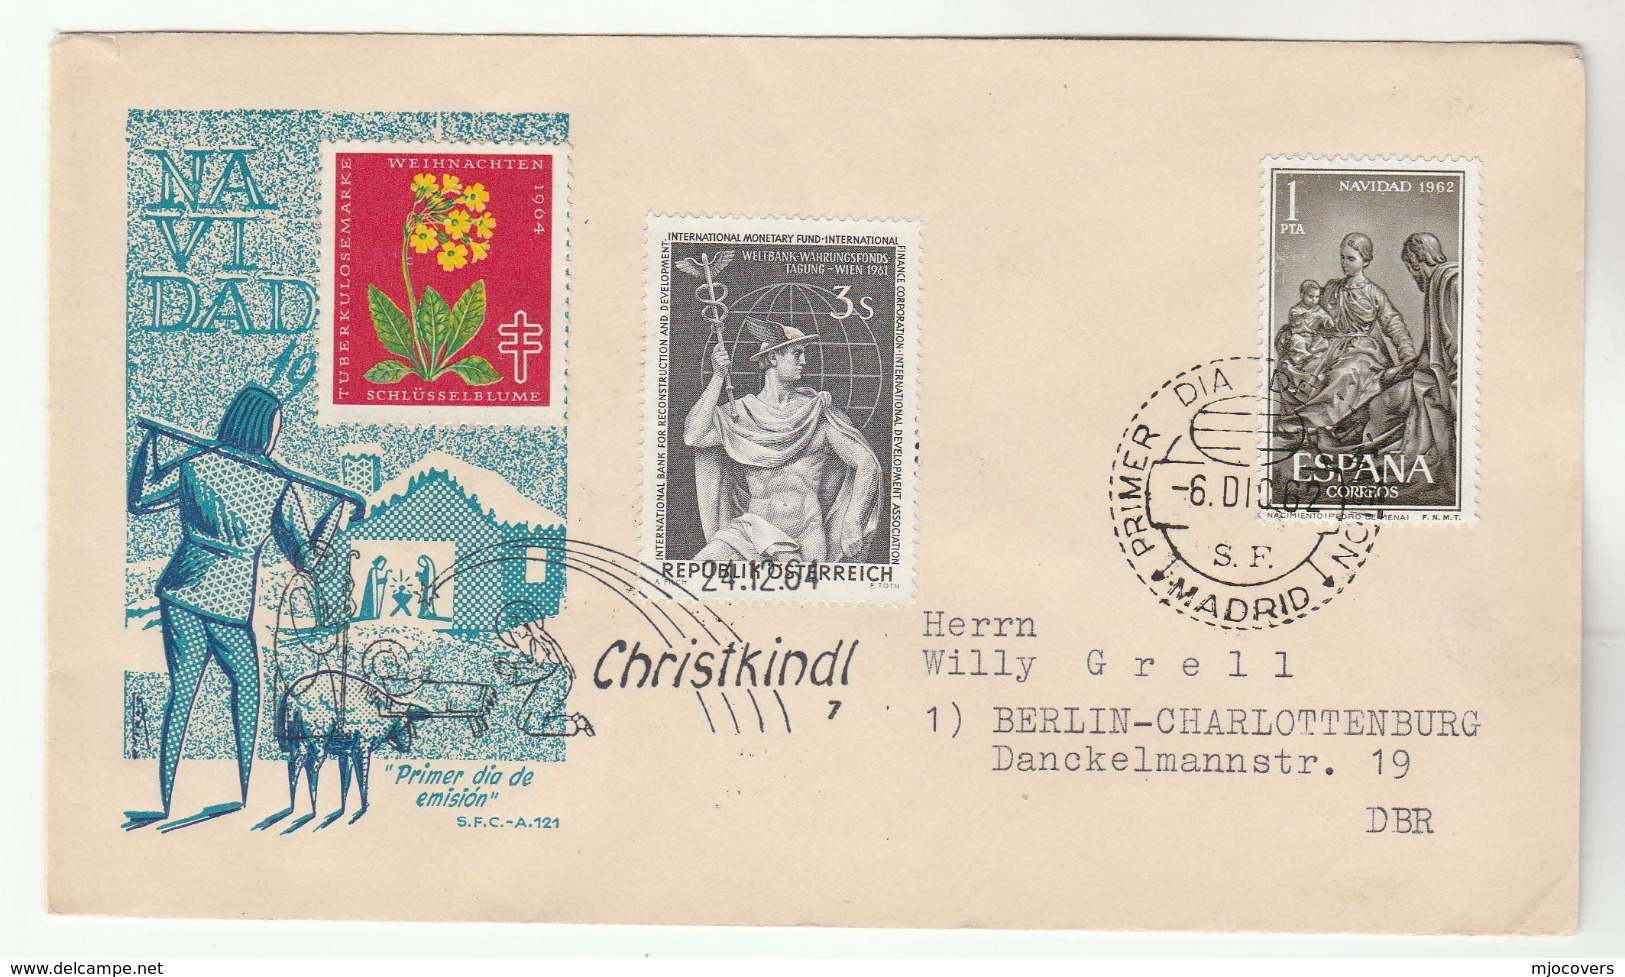 SPECIAL DOUBLE Event CHRISTMAS COVER CRISTKINDLE 64 / Spain FDC 1962 Cover Stamps AUSTRIA - Christmas